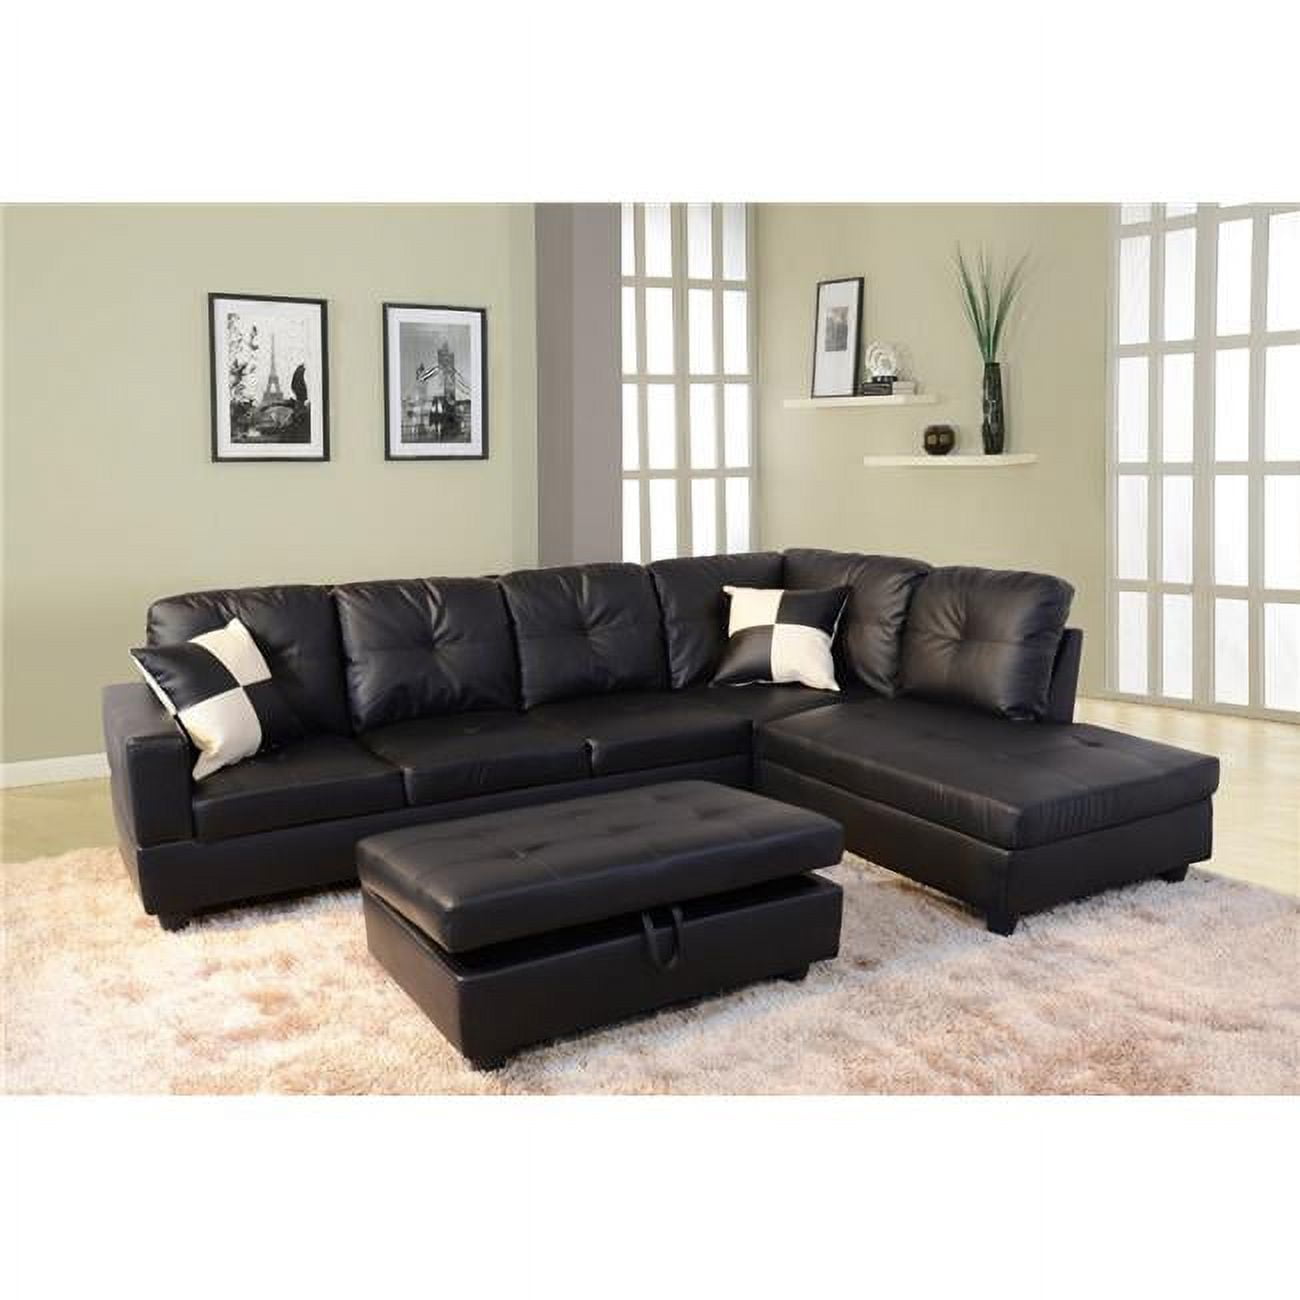 Picture of Beverly Fine Furniture F91B-3pc Cavenzi DelcBlack Faux Leather Right-facing Sectional Sofa Set